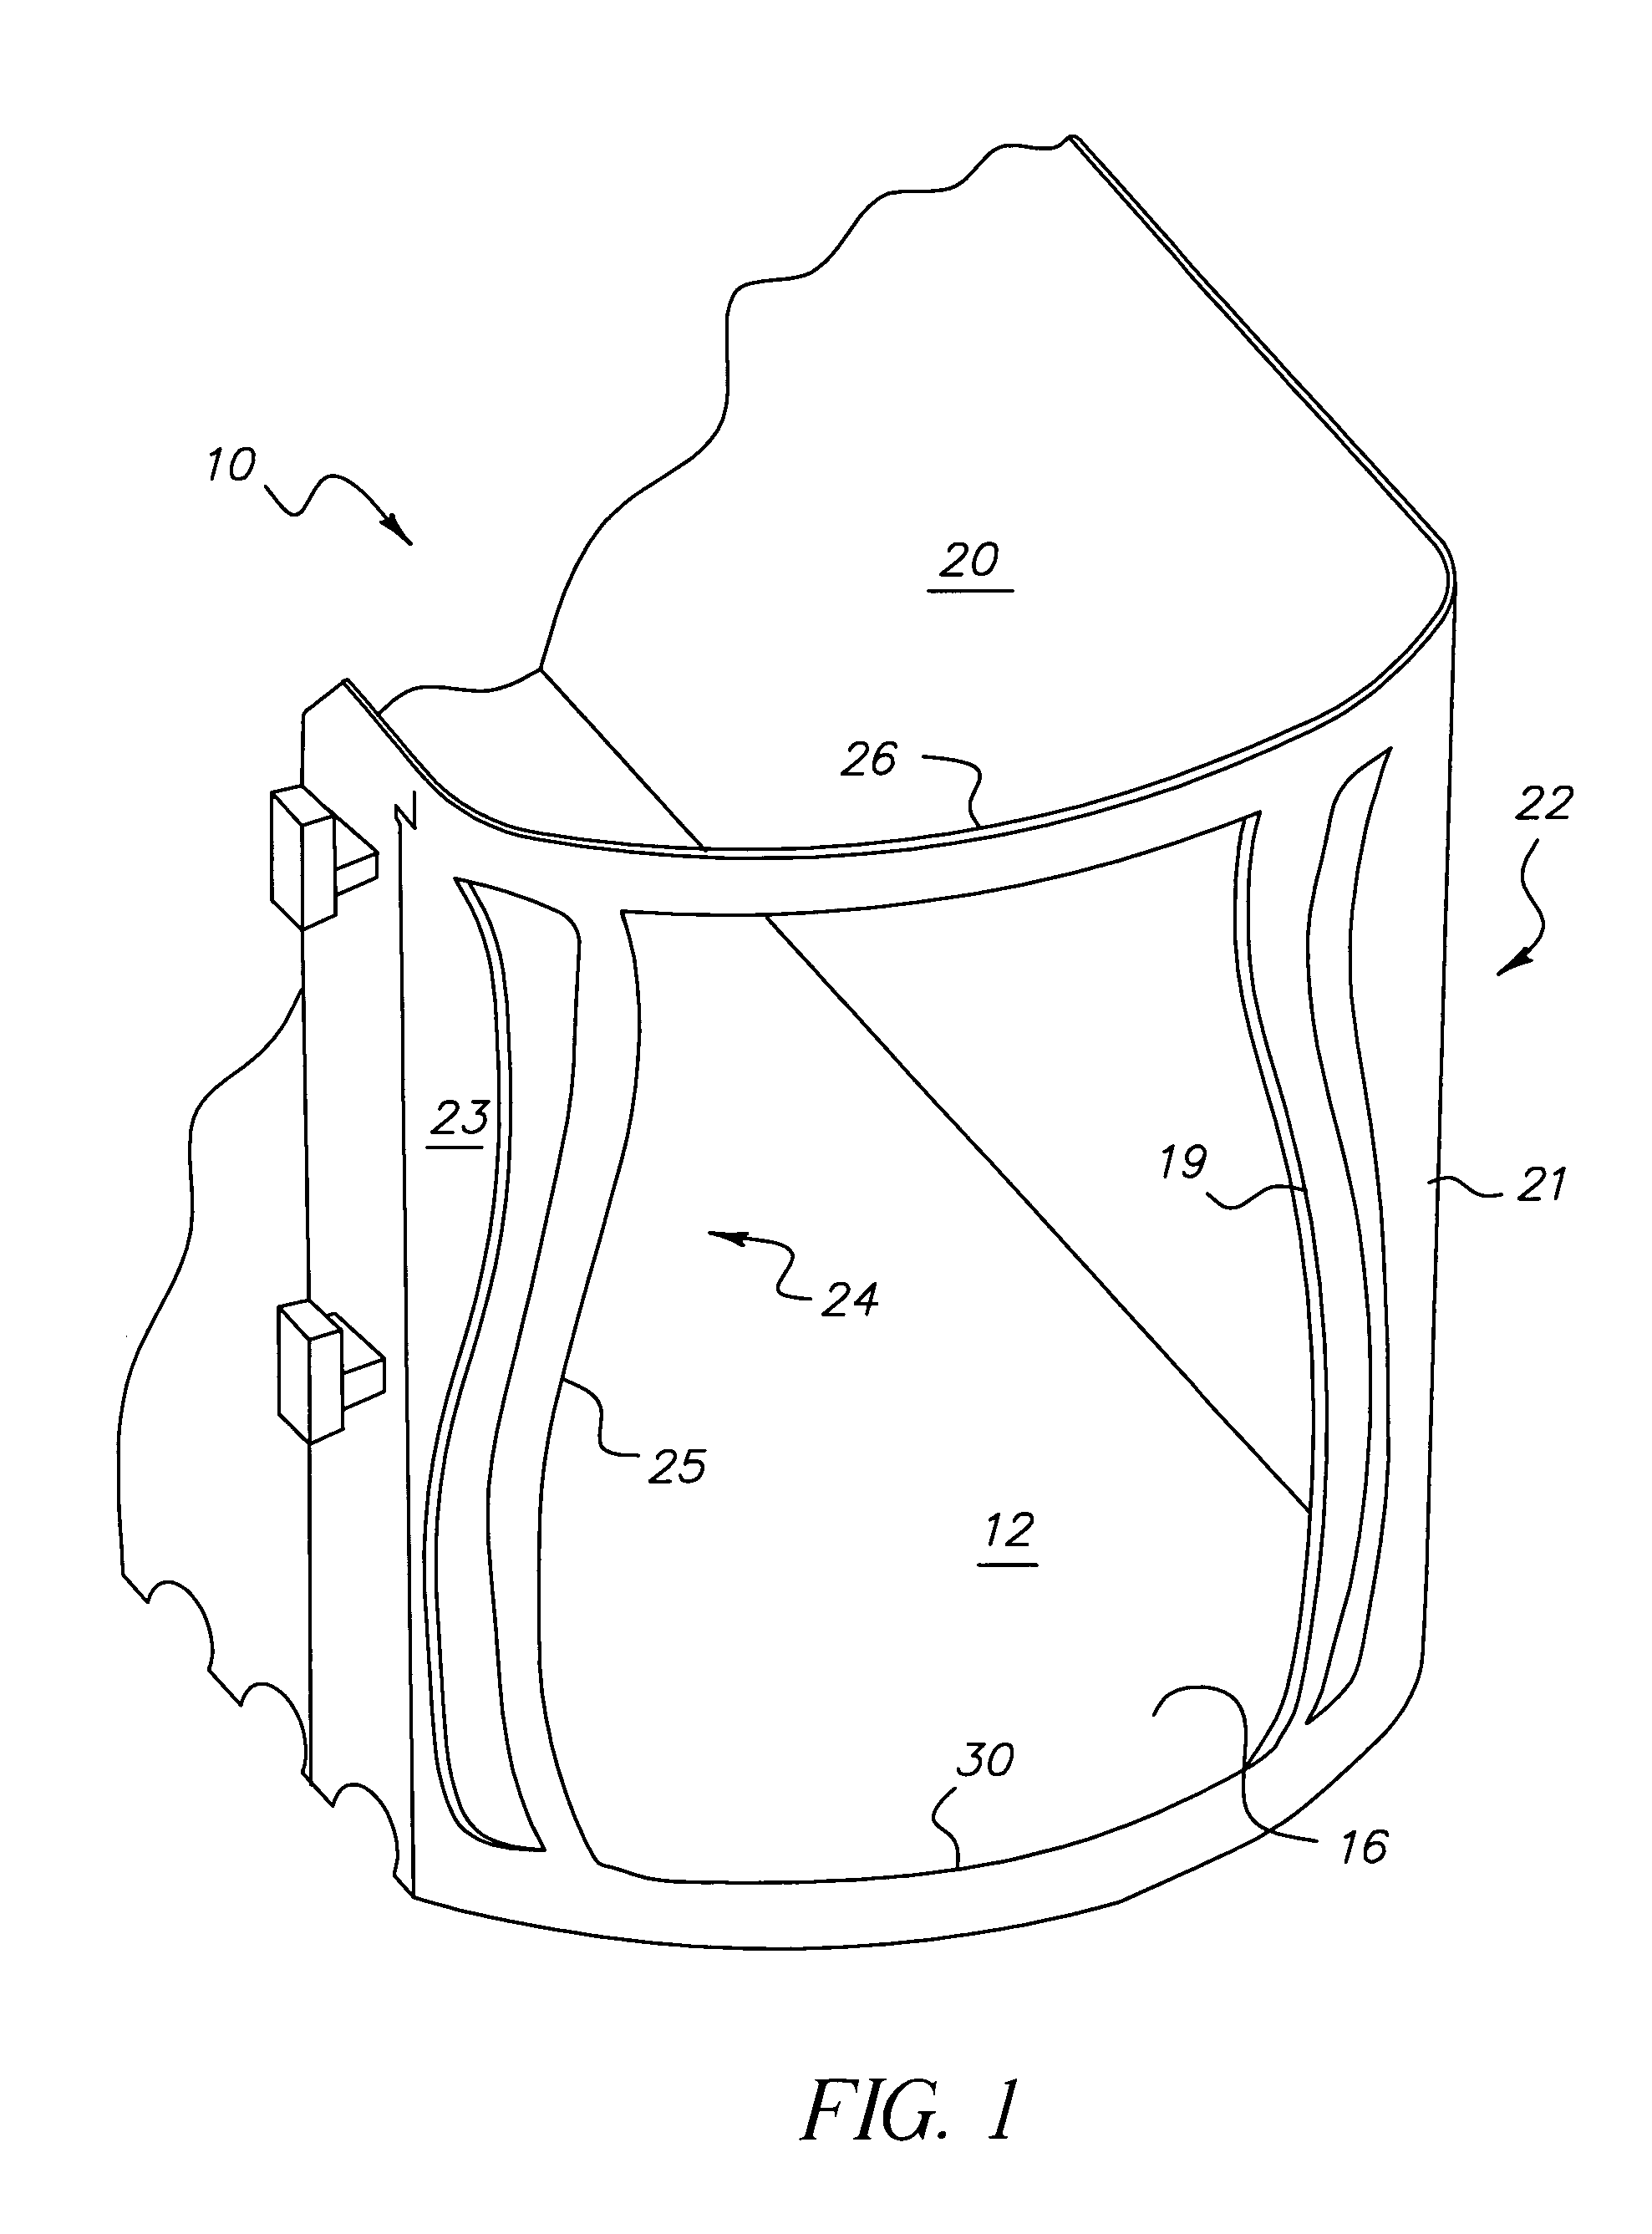 Display track device with anti-torsion bar